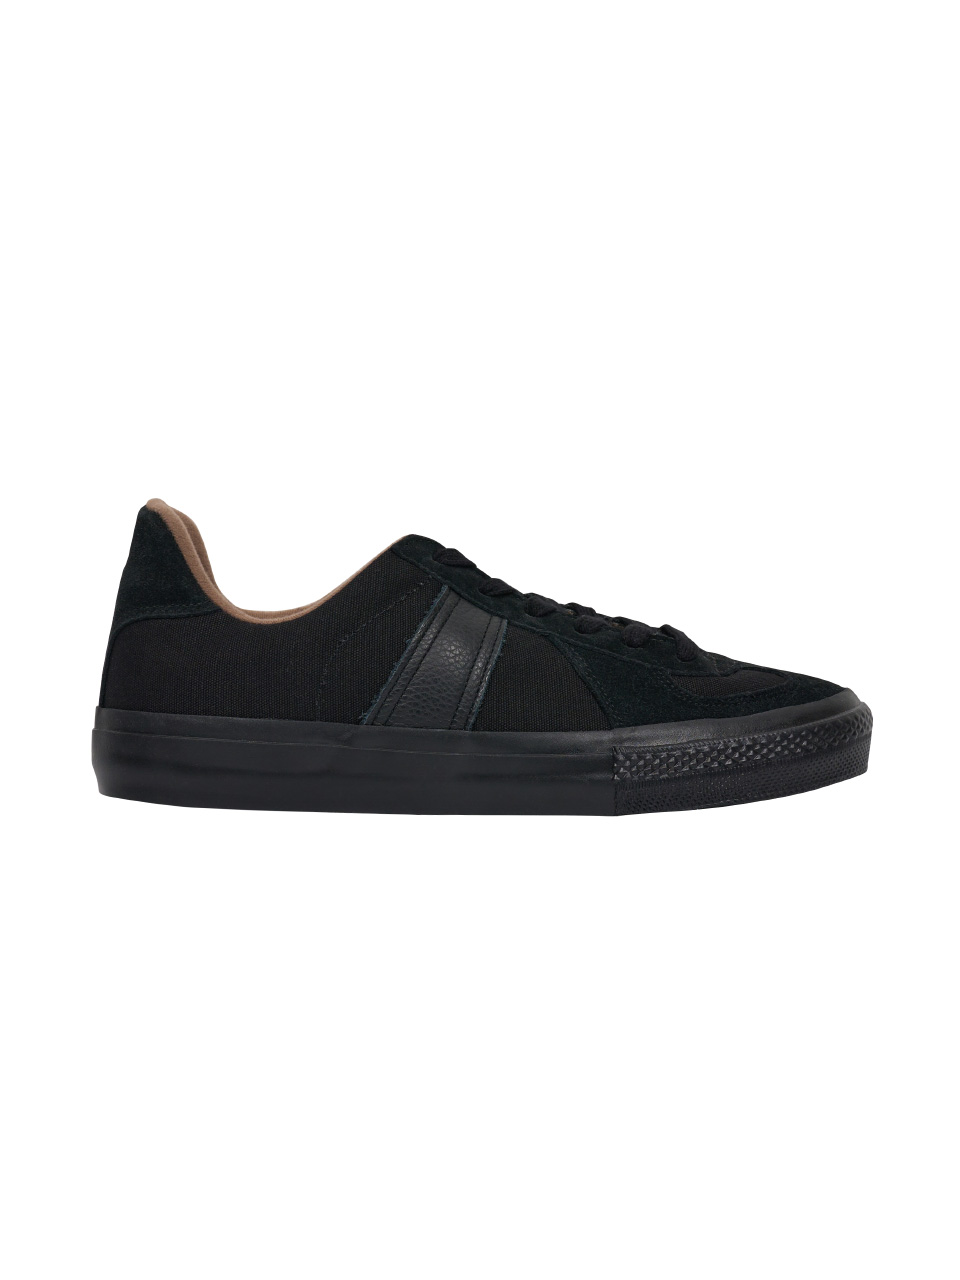 REPRODUCTION OF FOUND - MILITARY TRAINER (BLACK/BLACK)